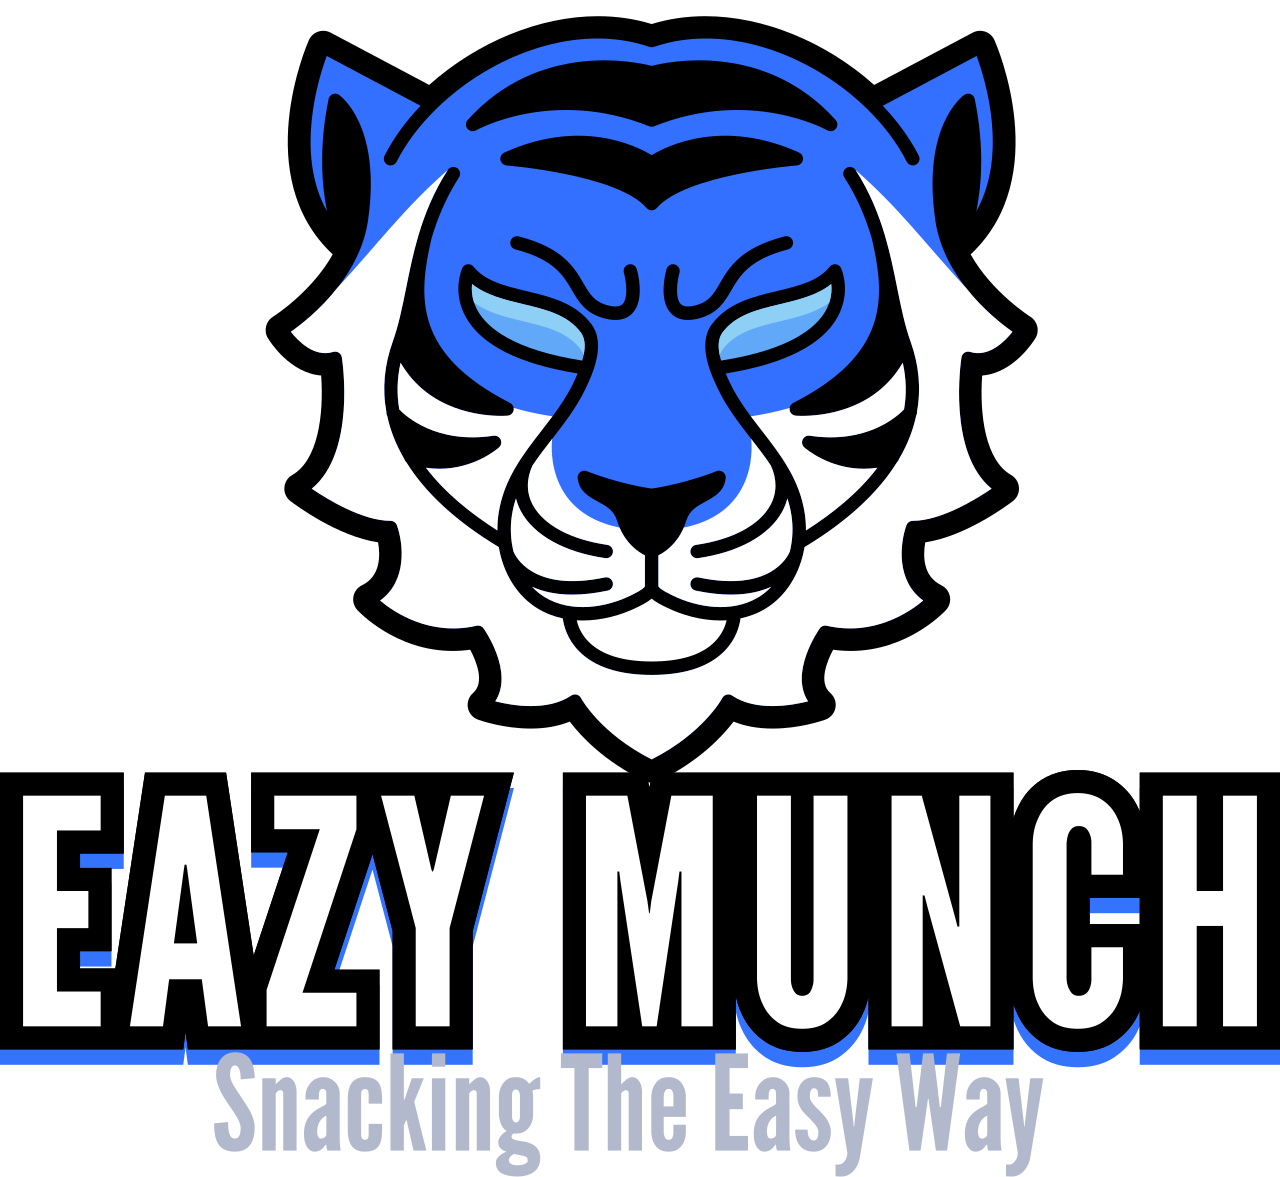 Eazy Munch 's web page